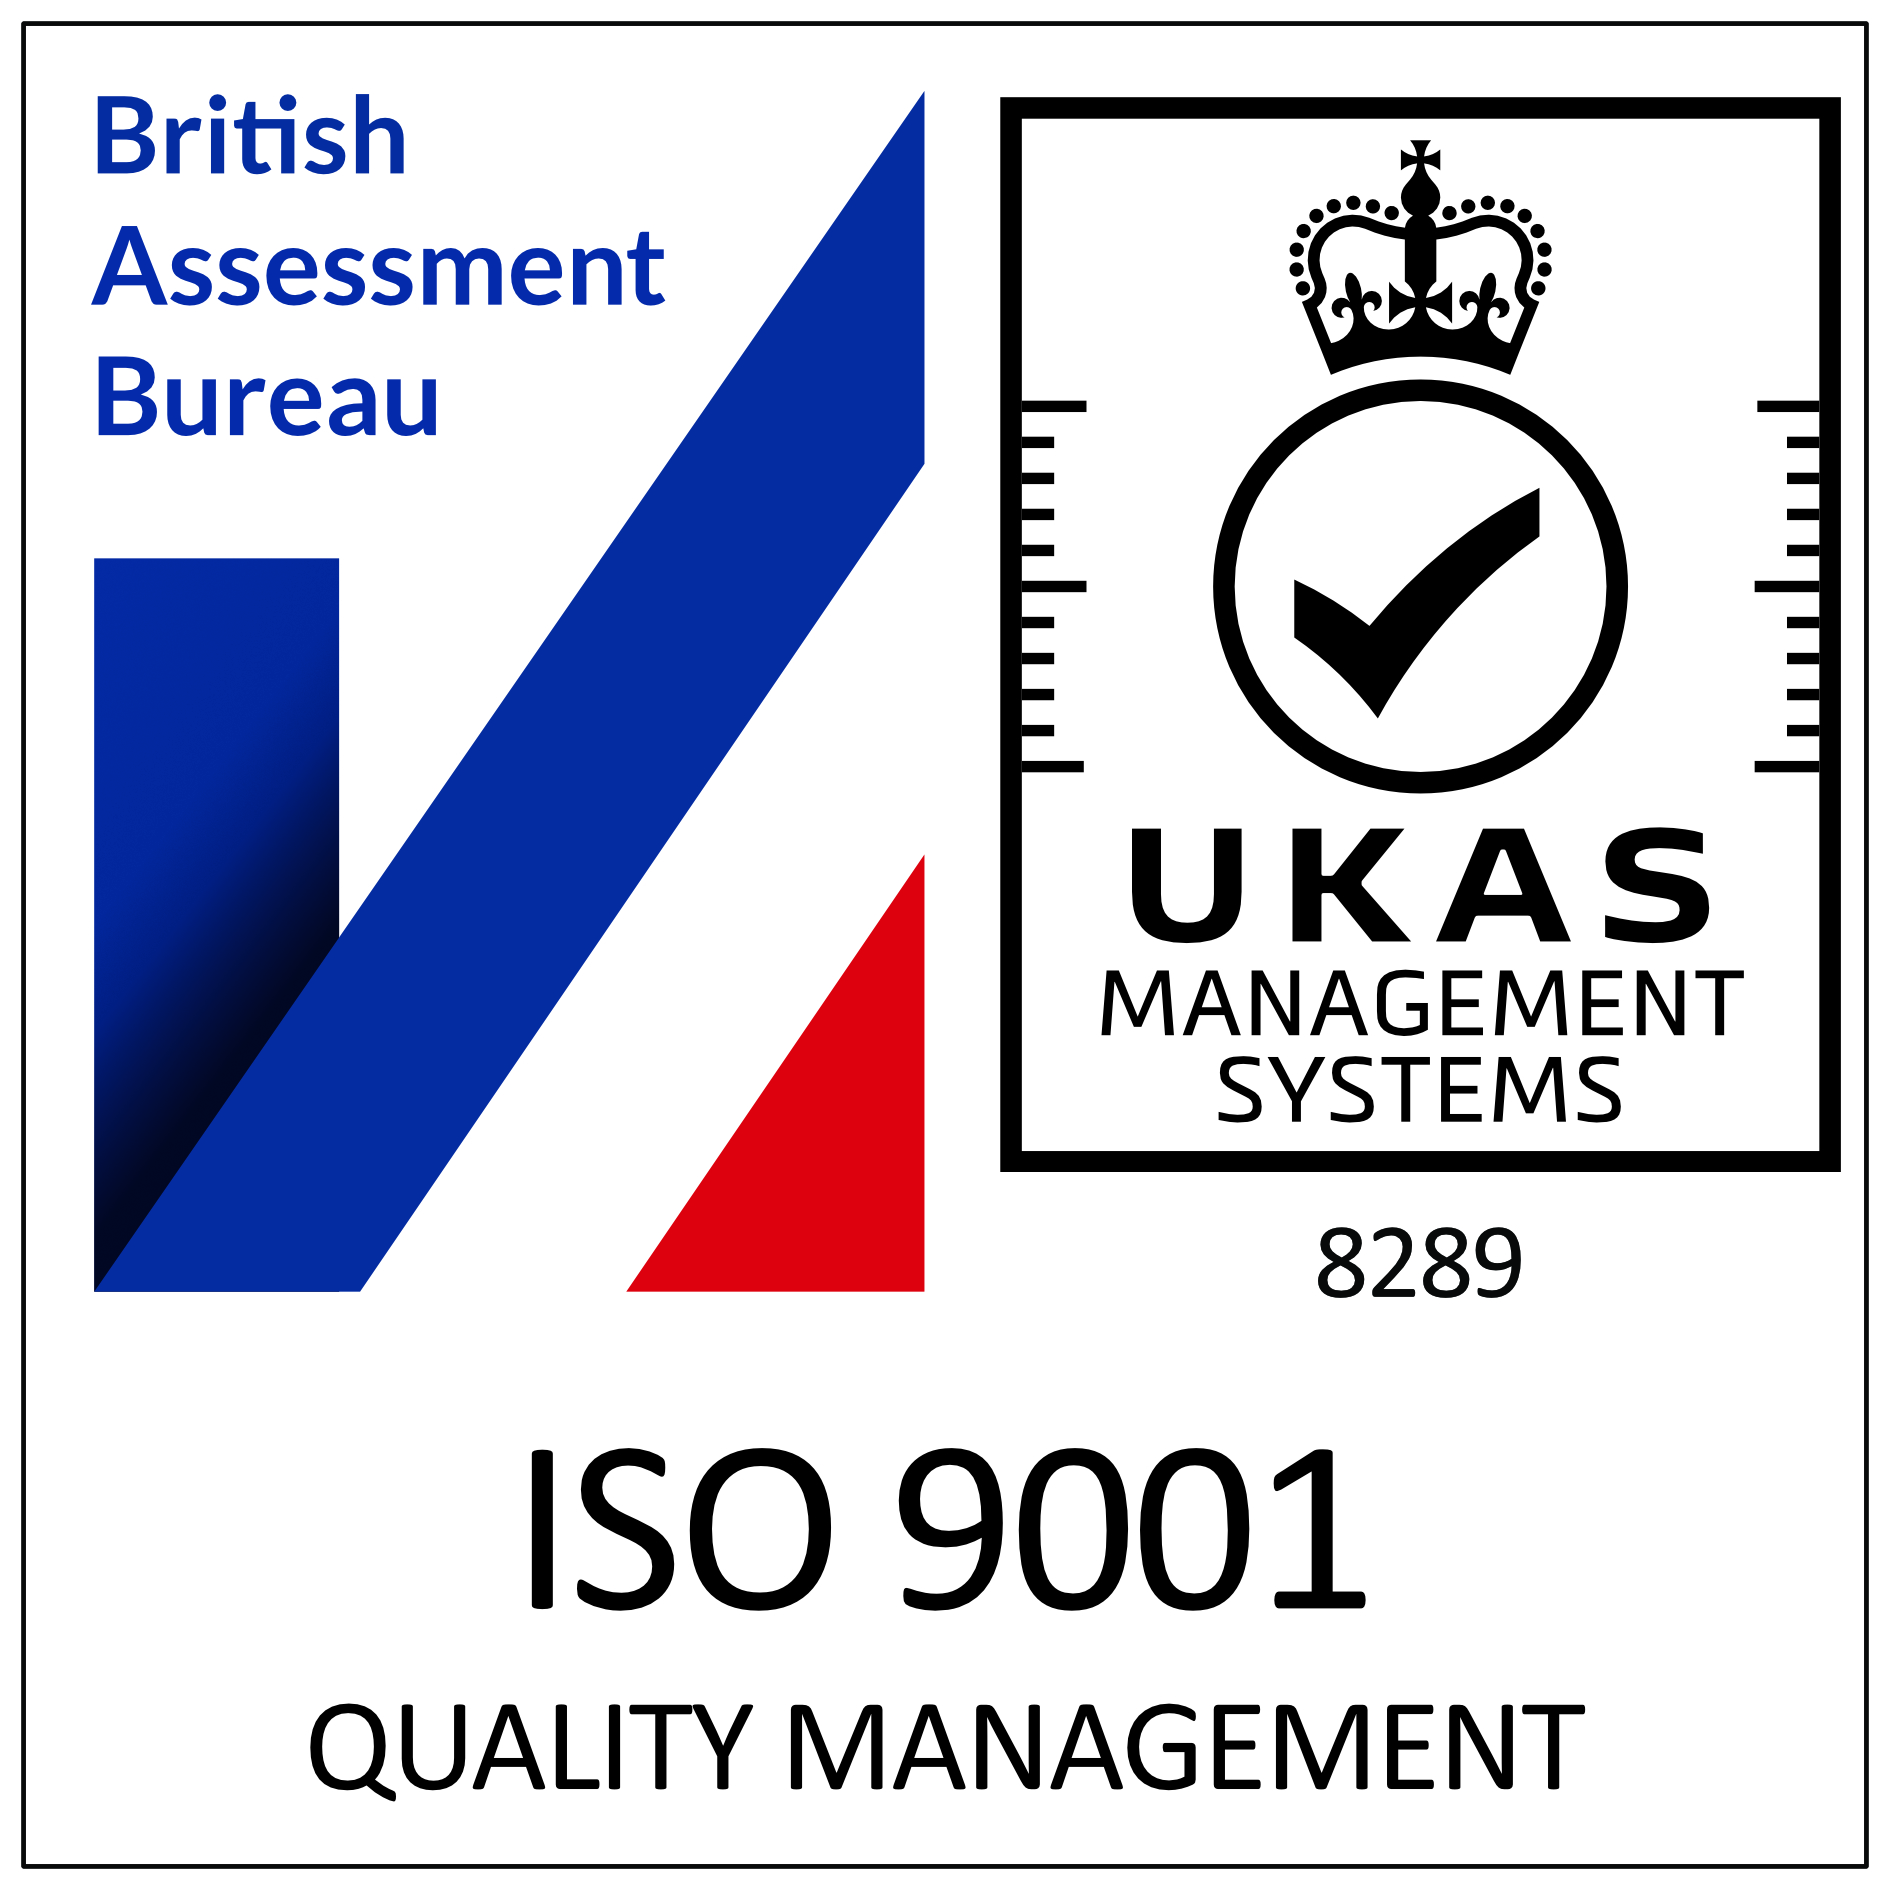 logo from the British Assessment Bureau that certifies Cantium with ISO 9001